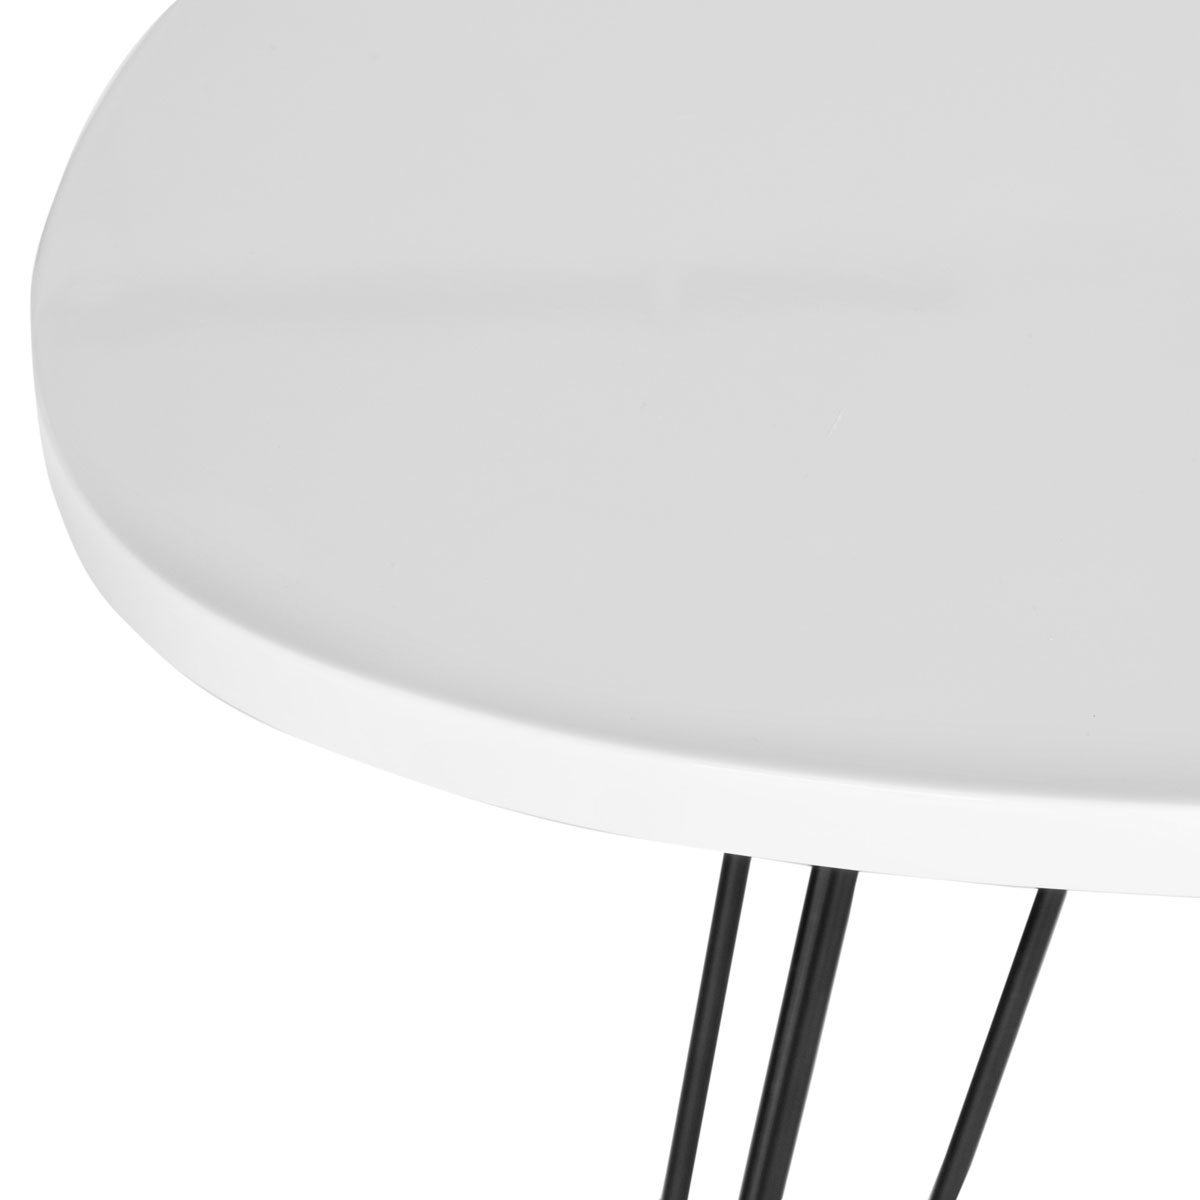 Wolcott Retro Mid Century Lacquer Side Table - White/Black - Arlo Home - Image 2